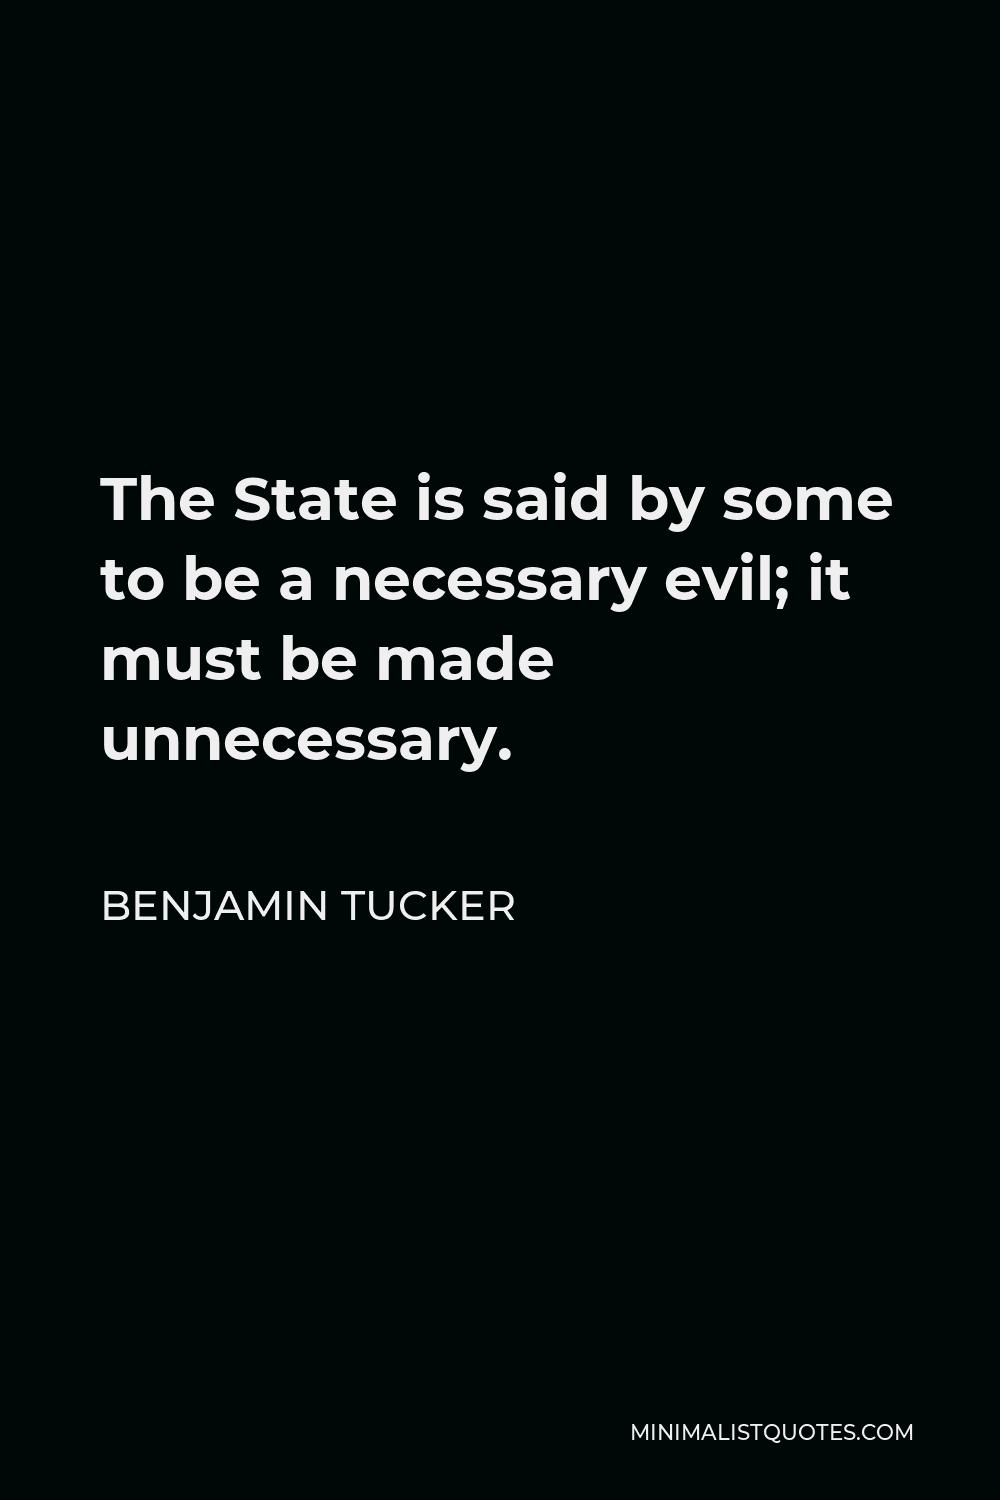 Benjamin Tucker Quote - The State is said by some to be a necessary evil; it must be made unnecessary.